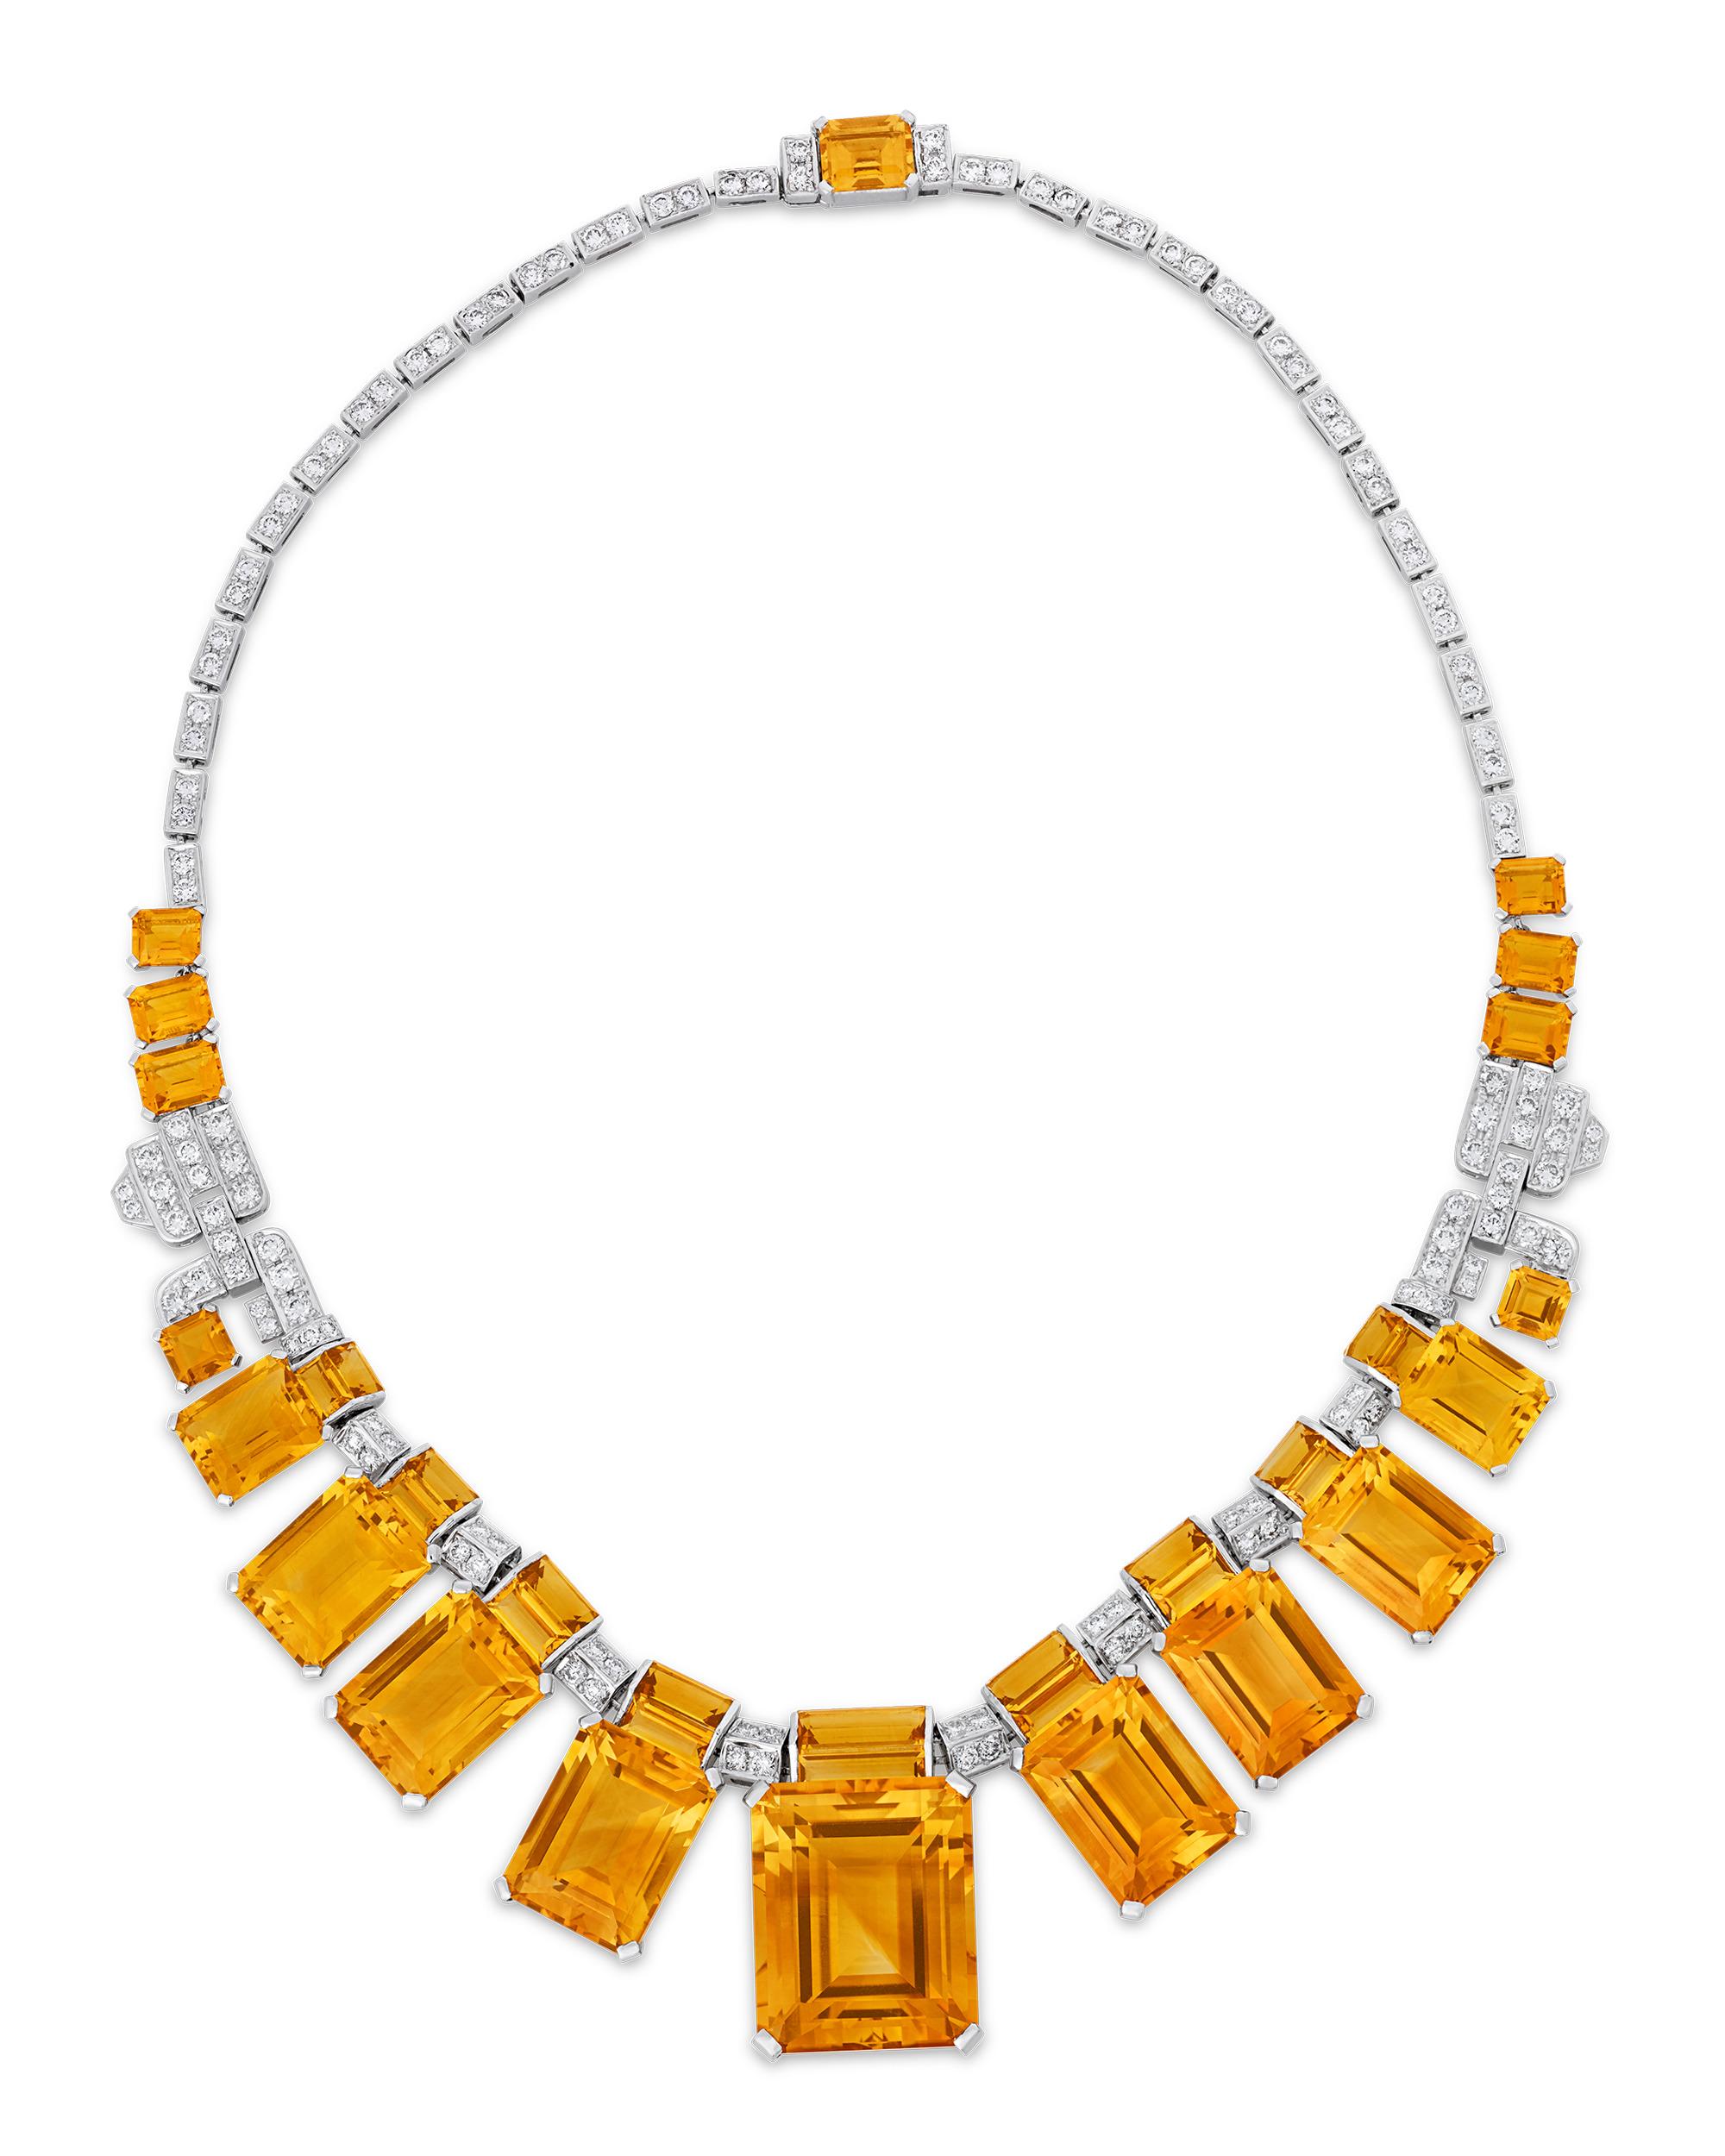 Emerald Cut Citrine And Diamond Necklace For Sale